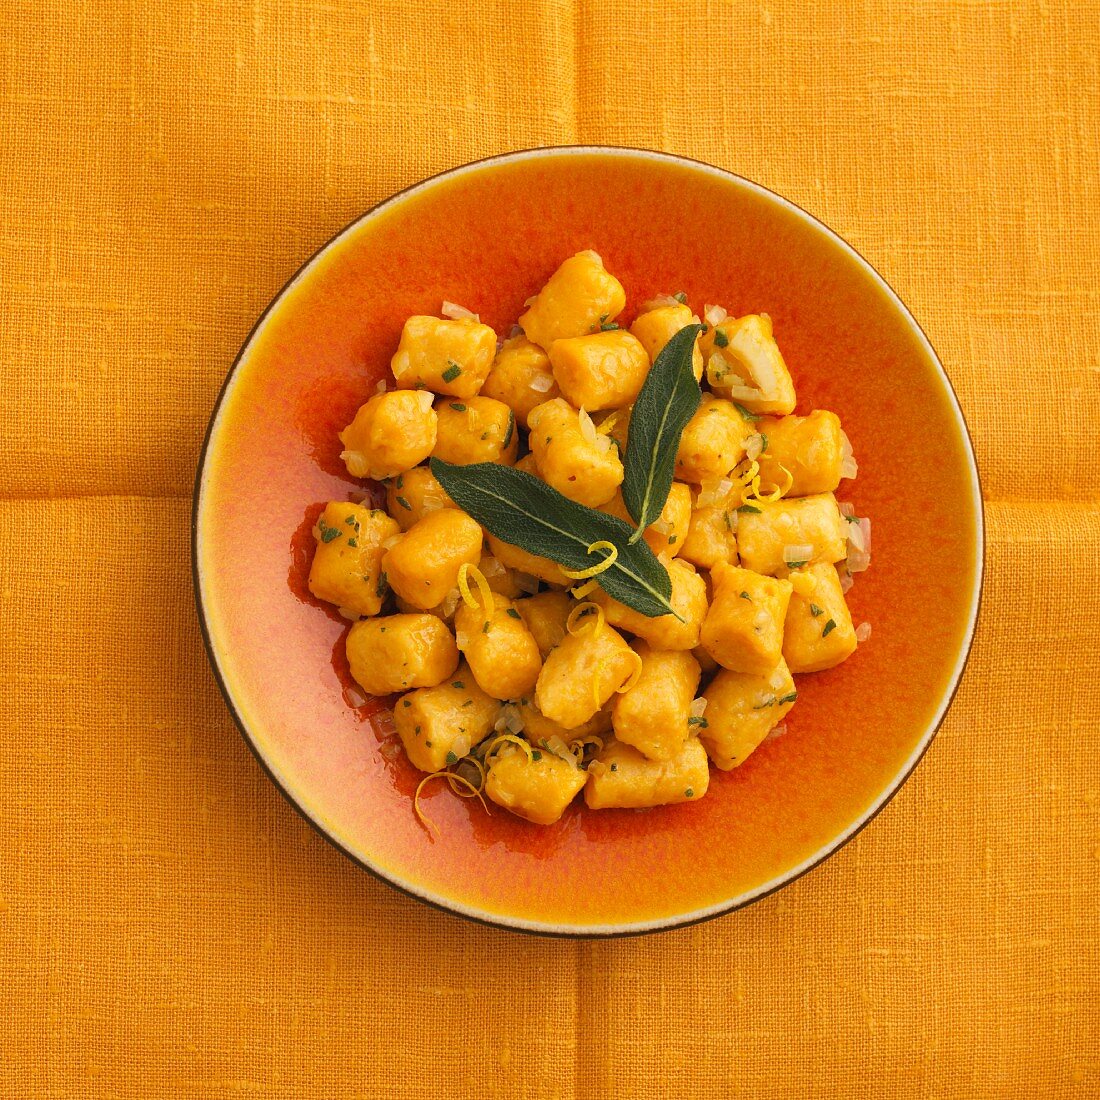 Gnocchi with sage and lemon zest (view from above)